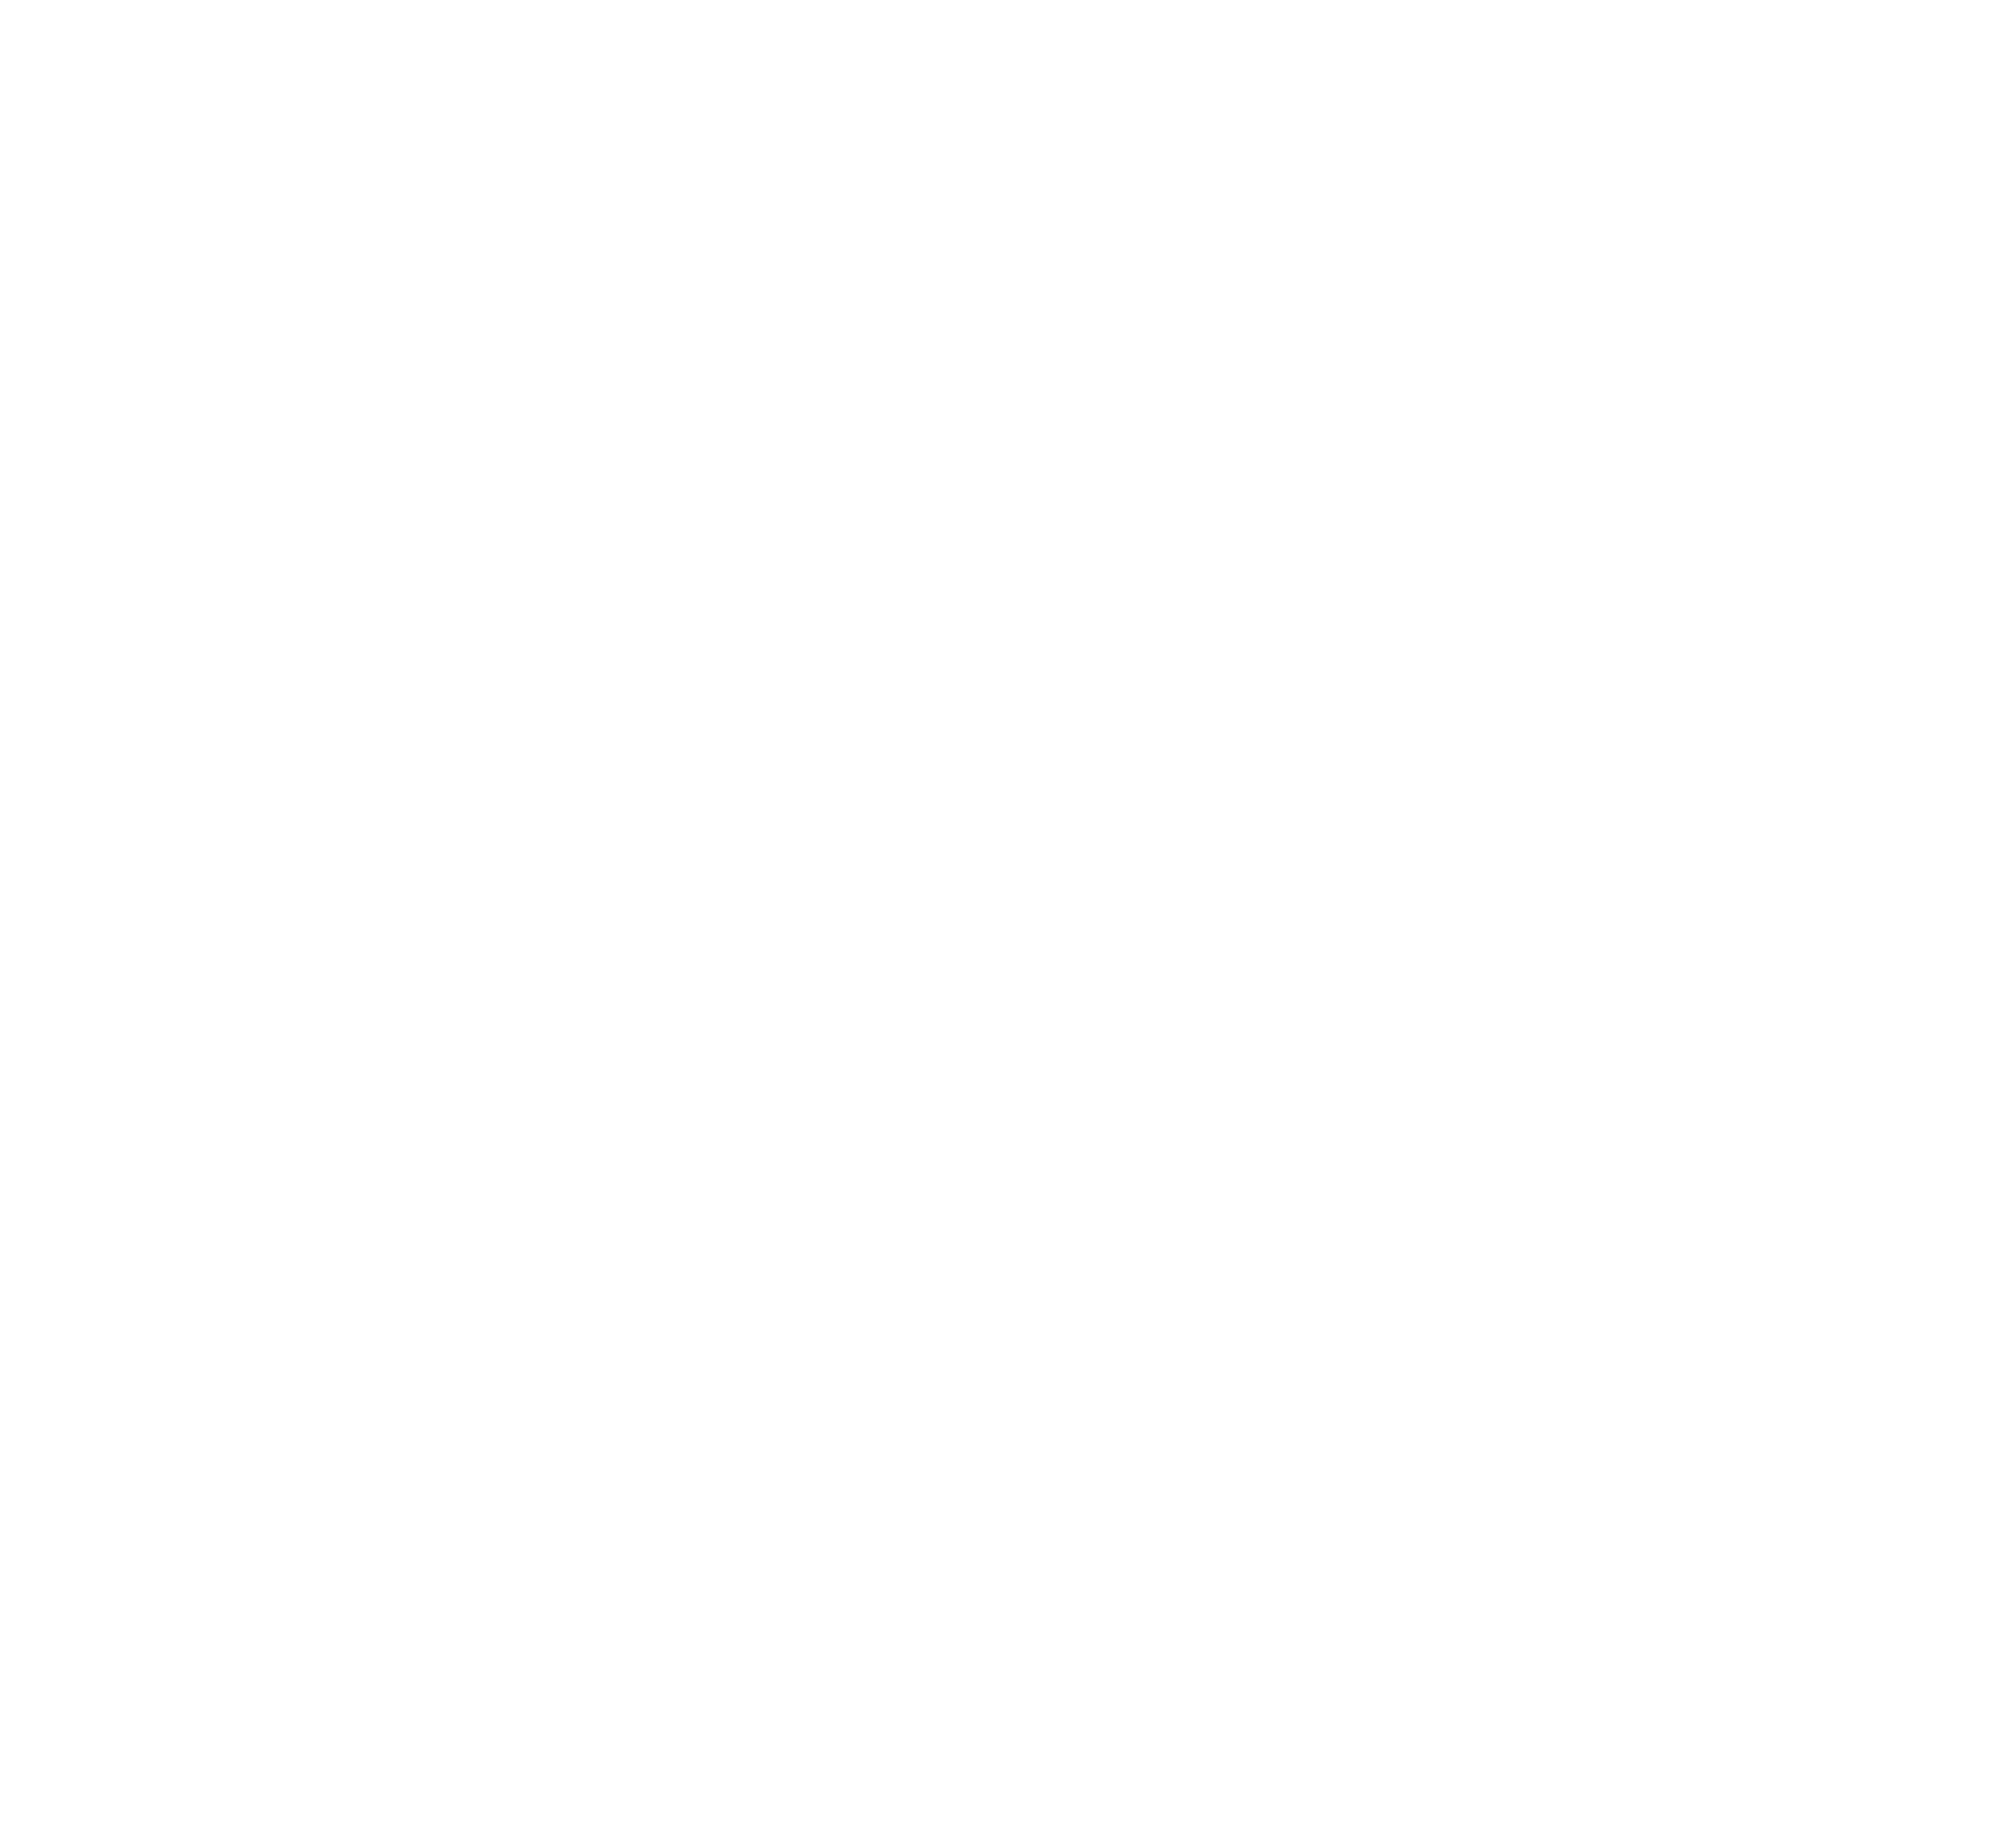 Elements Eatery awarded Business of the Year at the Business Excellence Awards